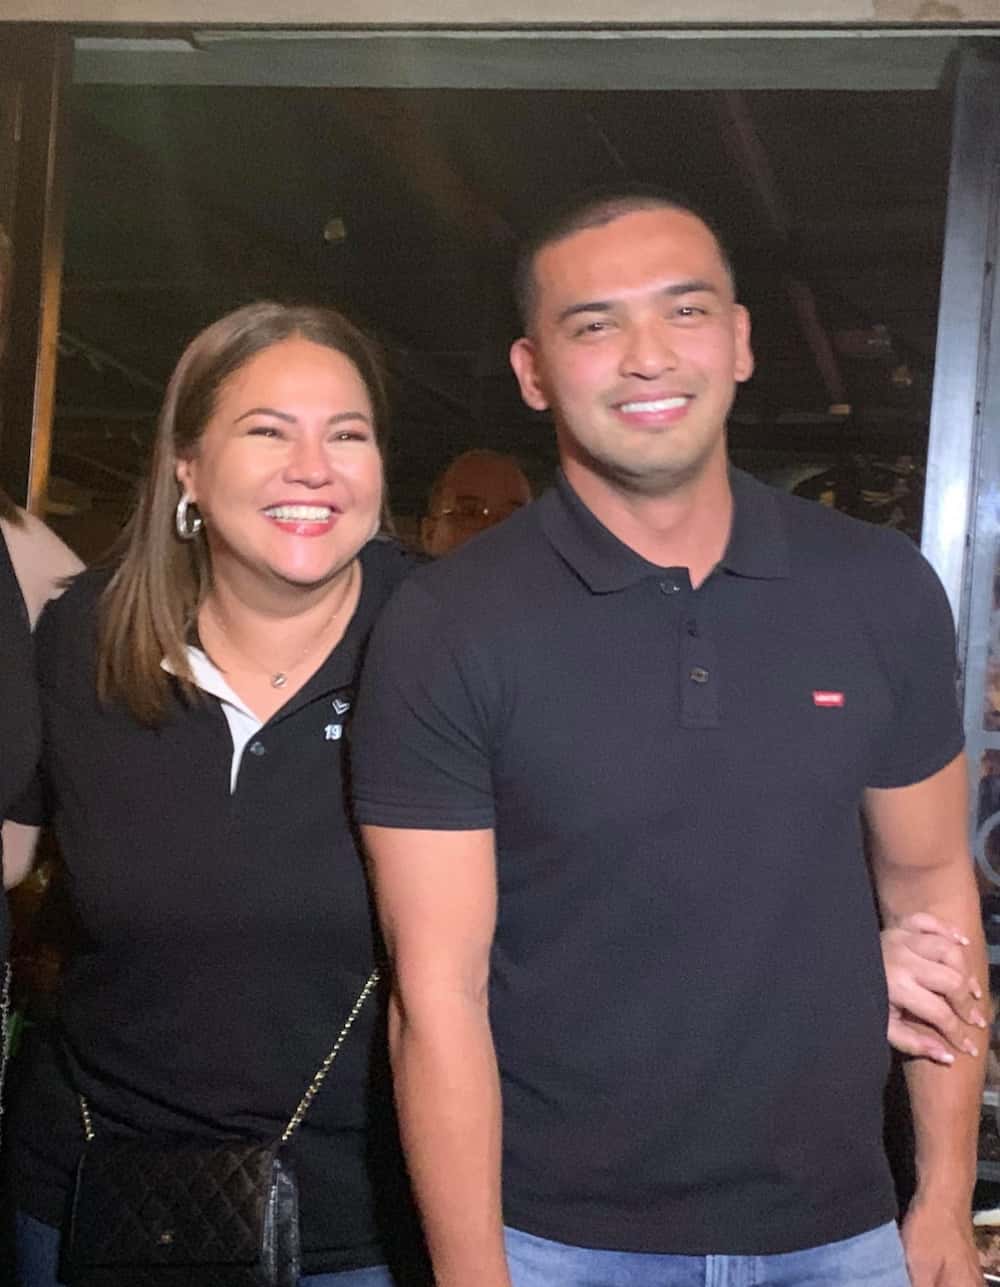 Karla Estrada attends event with special someone; netizens react